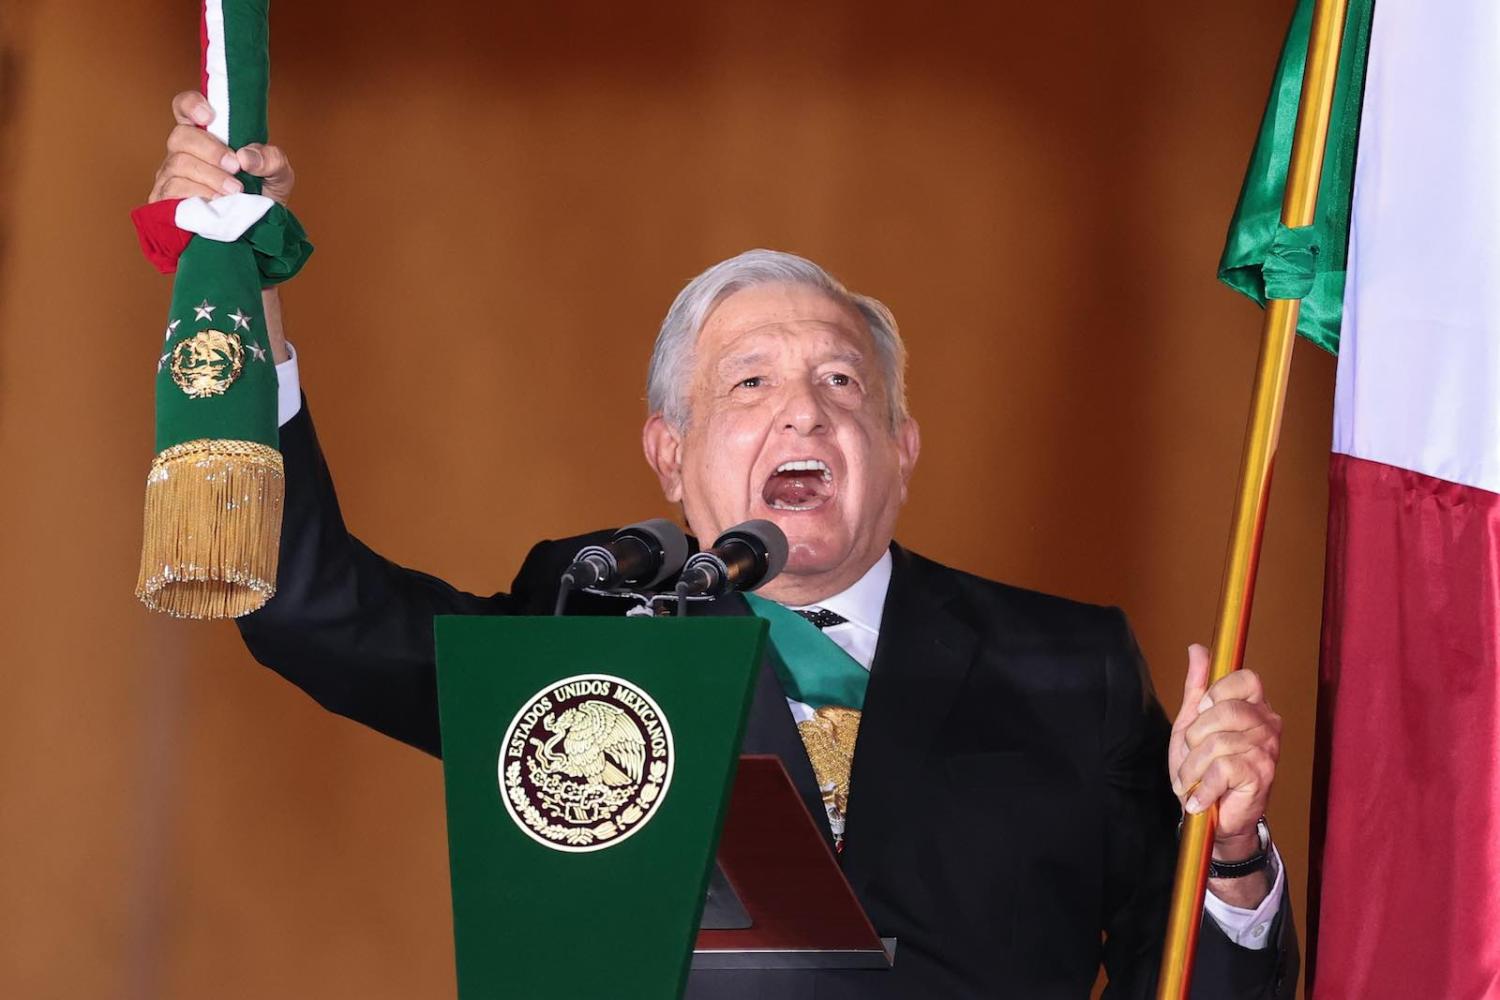 Mexican President Andrés Manuel López Obrador delivers the “Cry of Dolores” to kick off Independence Day celebrations at the National Palace in Mexico City, 15 September 2020 (Hector Vivas/Getty Images)